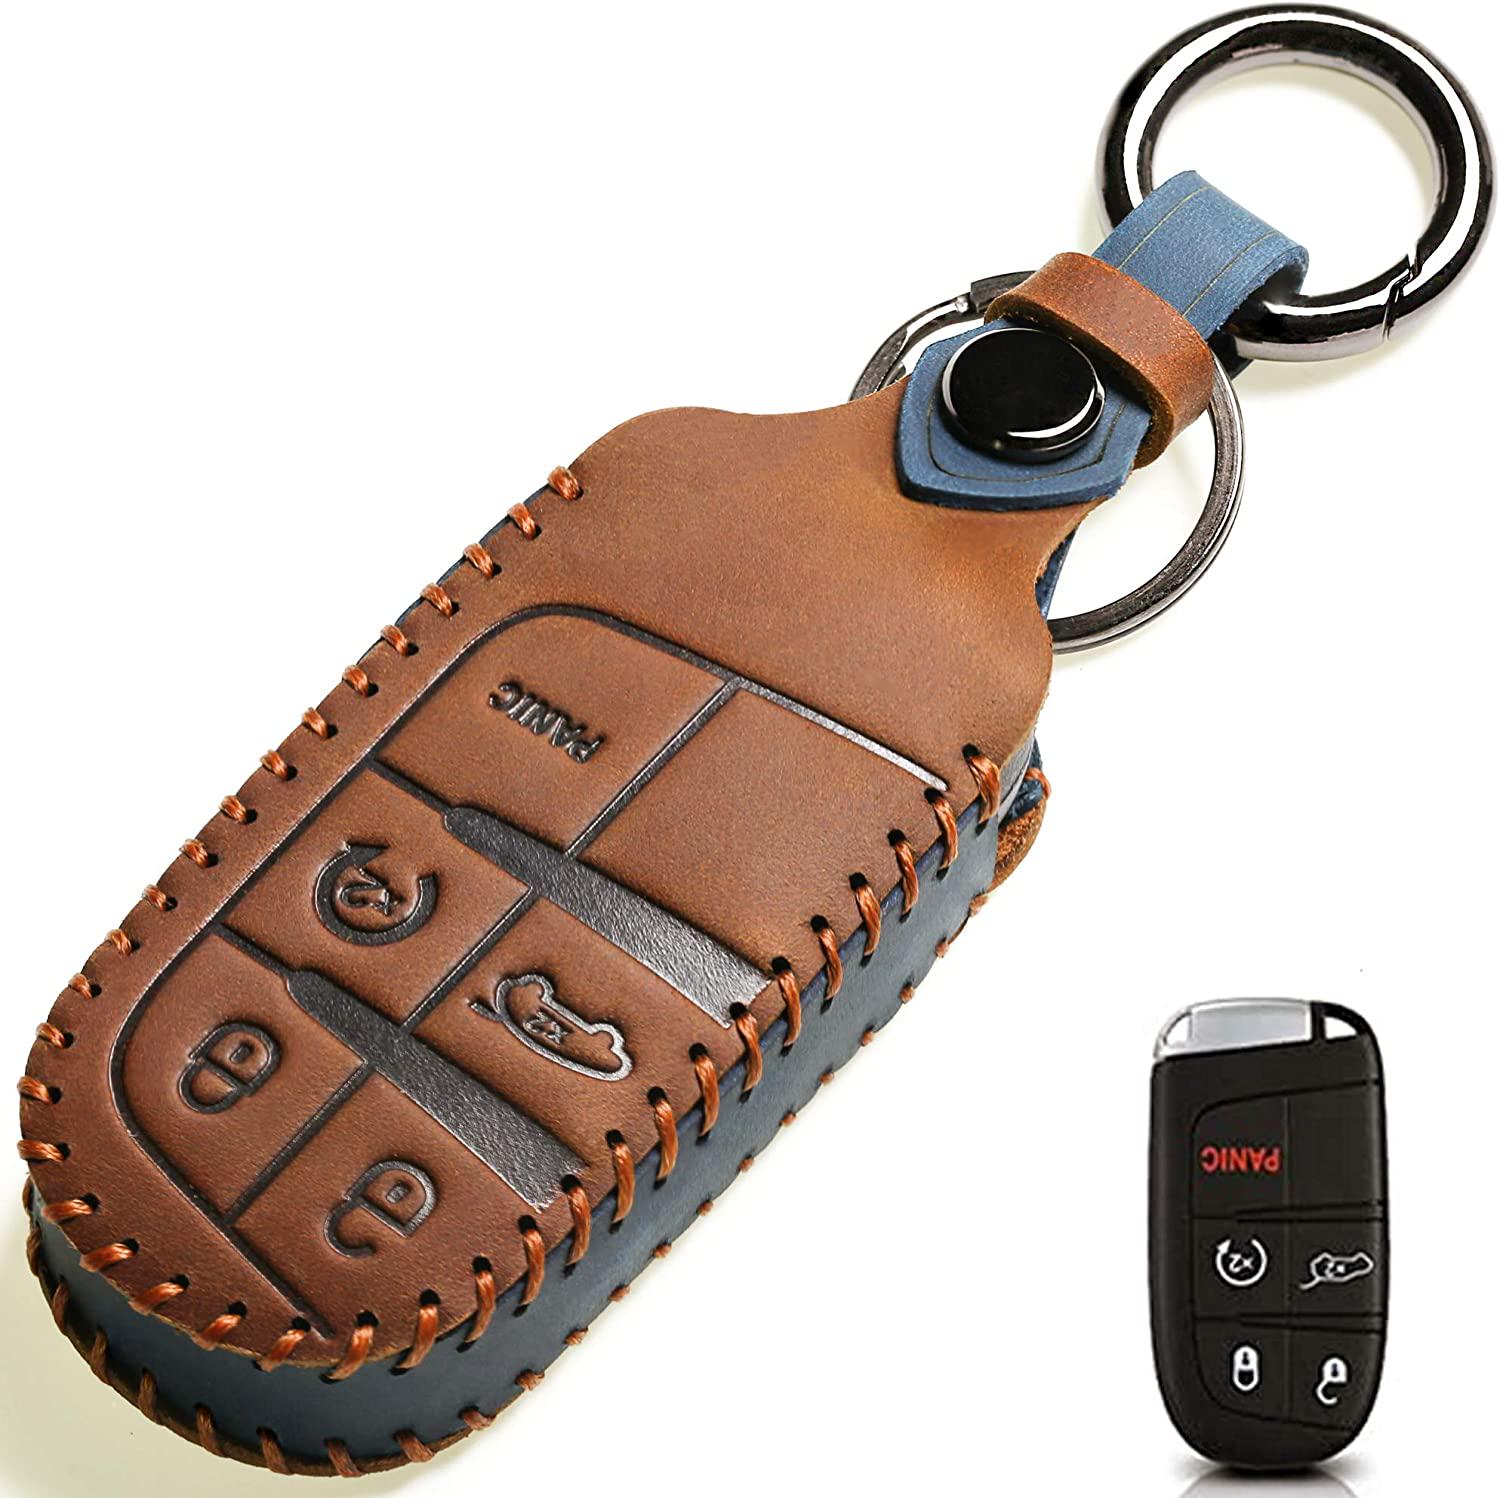 ZiHafate, Leather Car Key Fob Cover, Suit for Keyless Remote Control for Jeep Grand Cherokee Dodge Challenger Charger Dart Durango Journey Chrysler 200 300 Fiat etc (A Style, Brown)